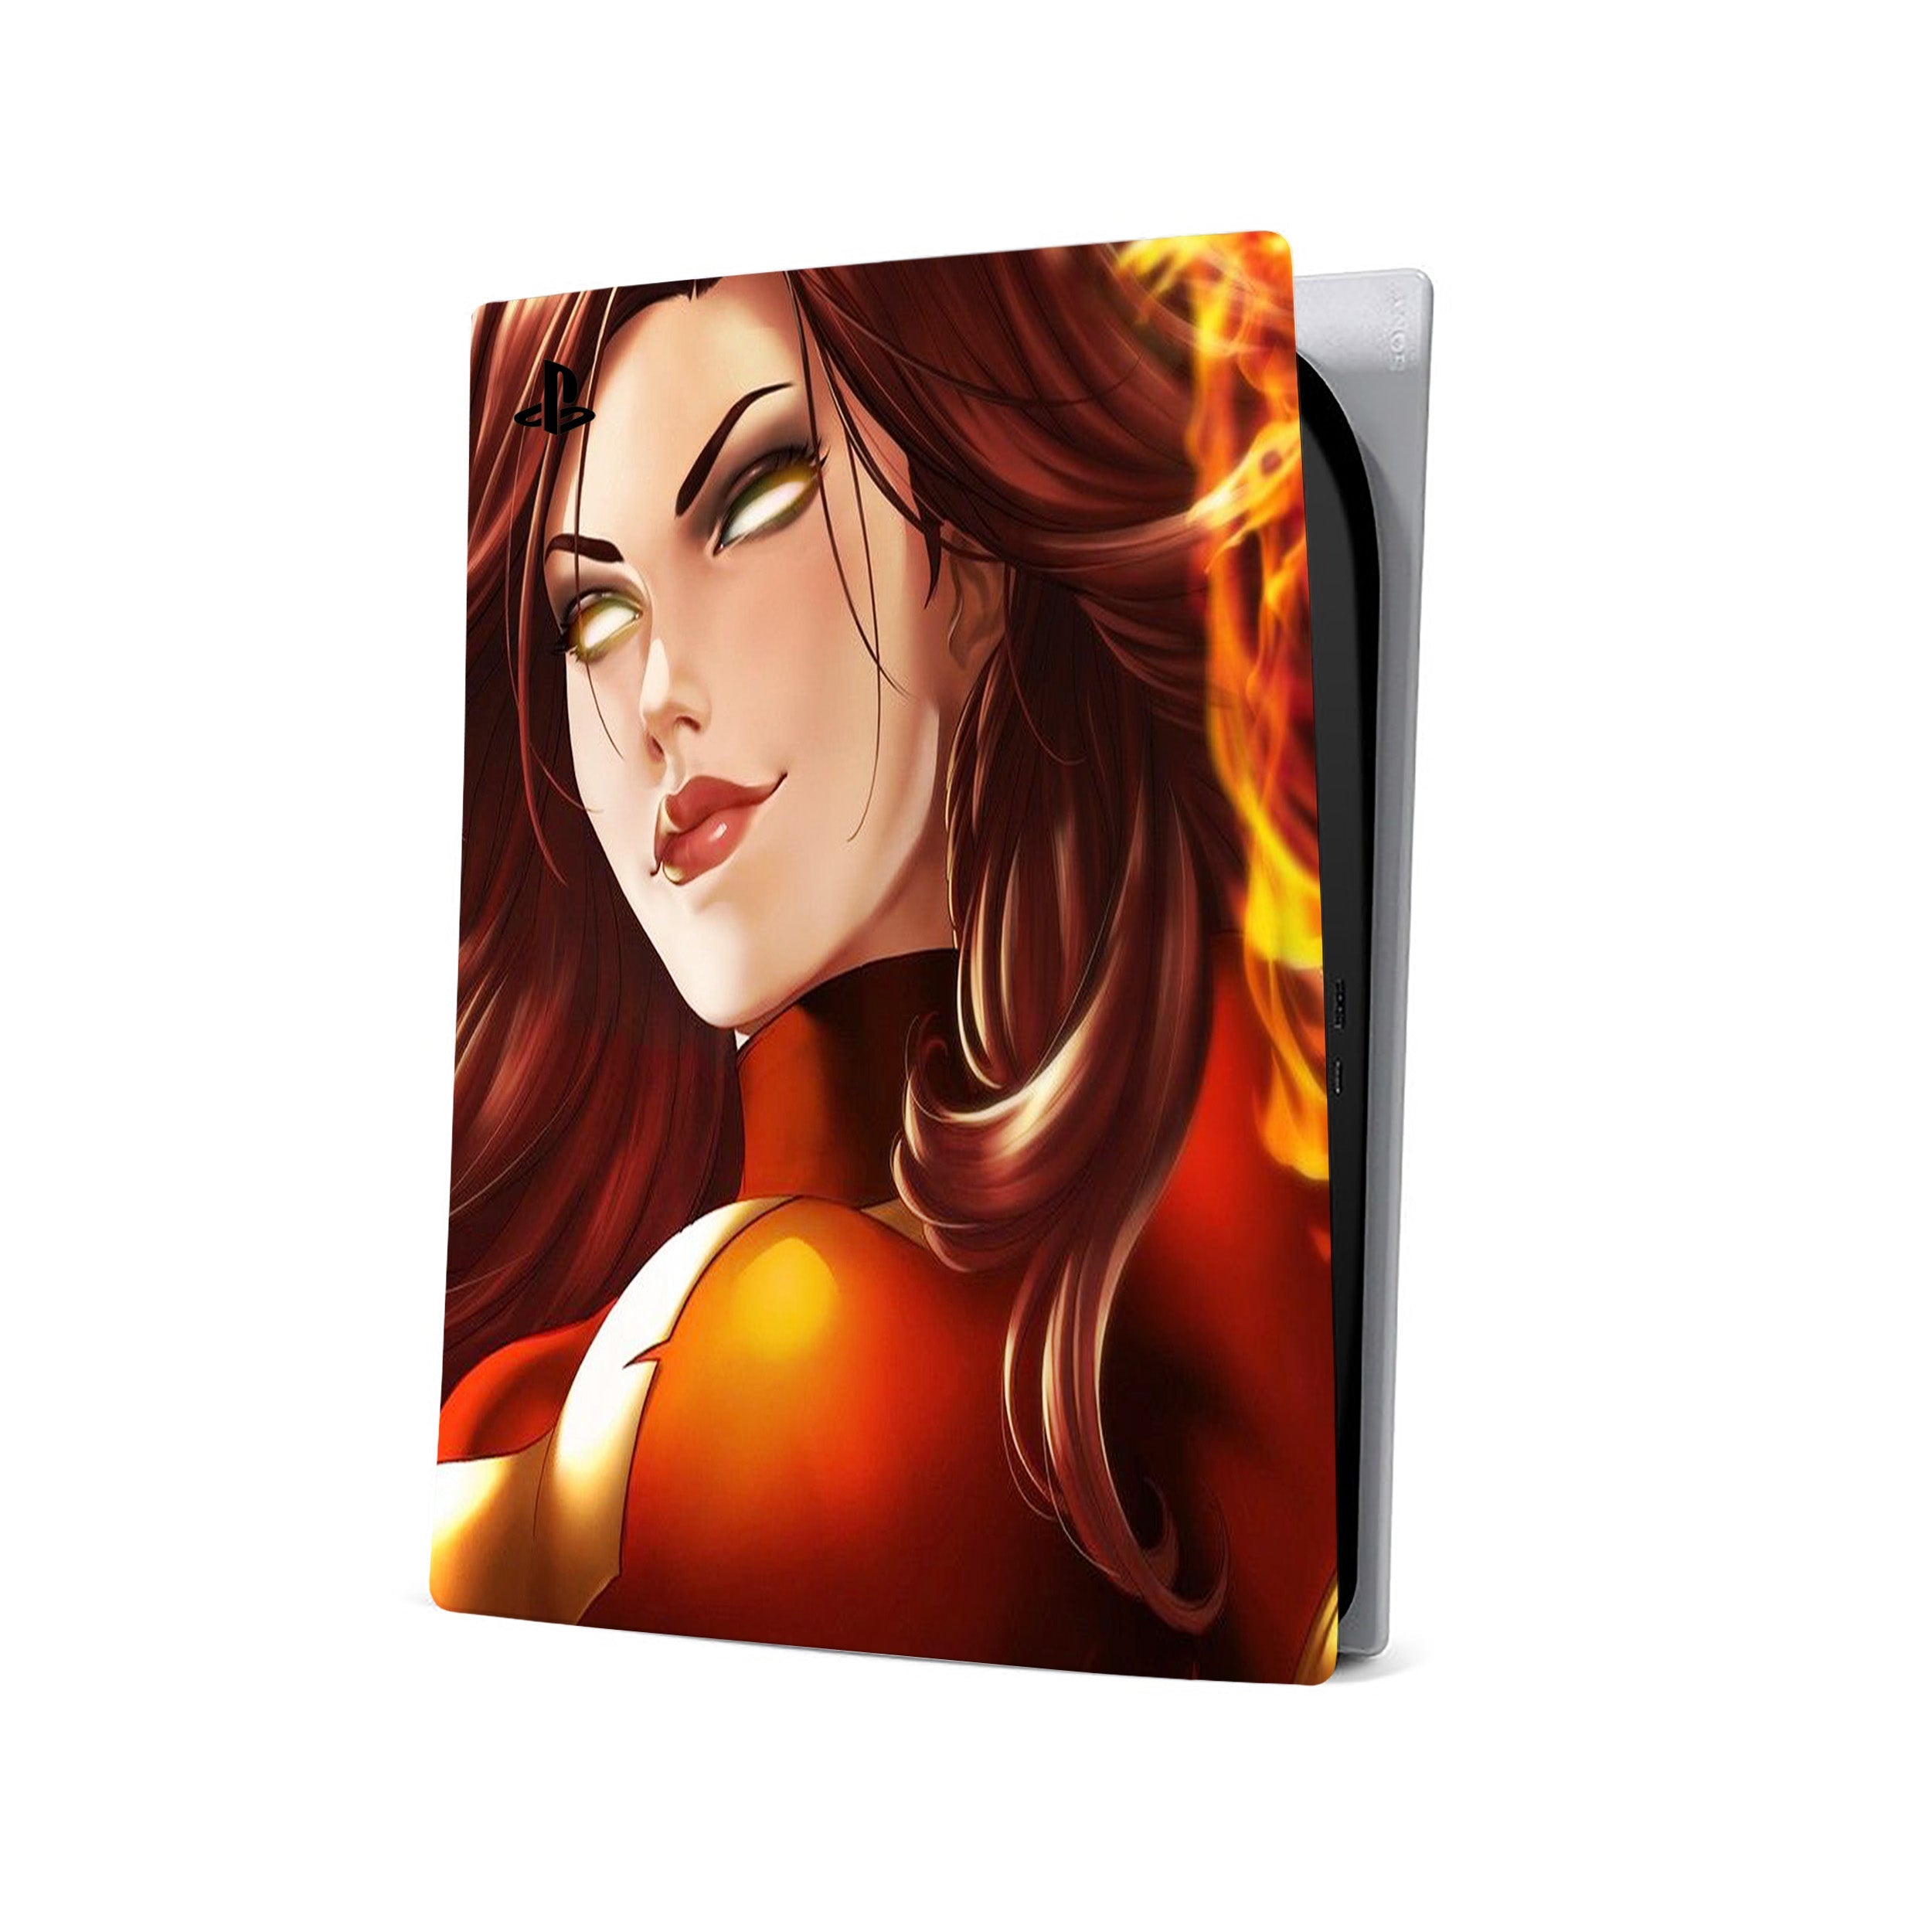 A video game skin featuring a Marvel X Men Phoenix design for the PS5.